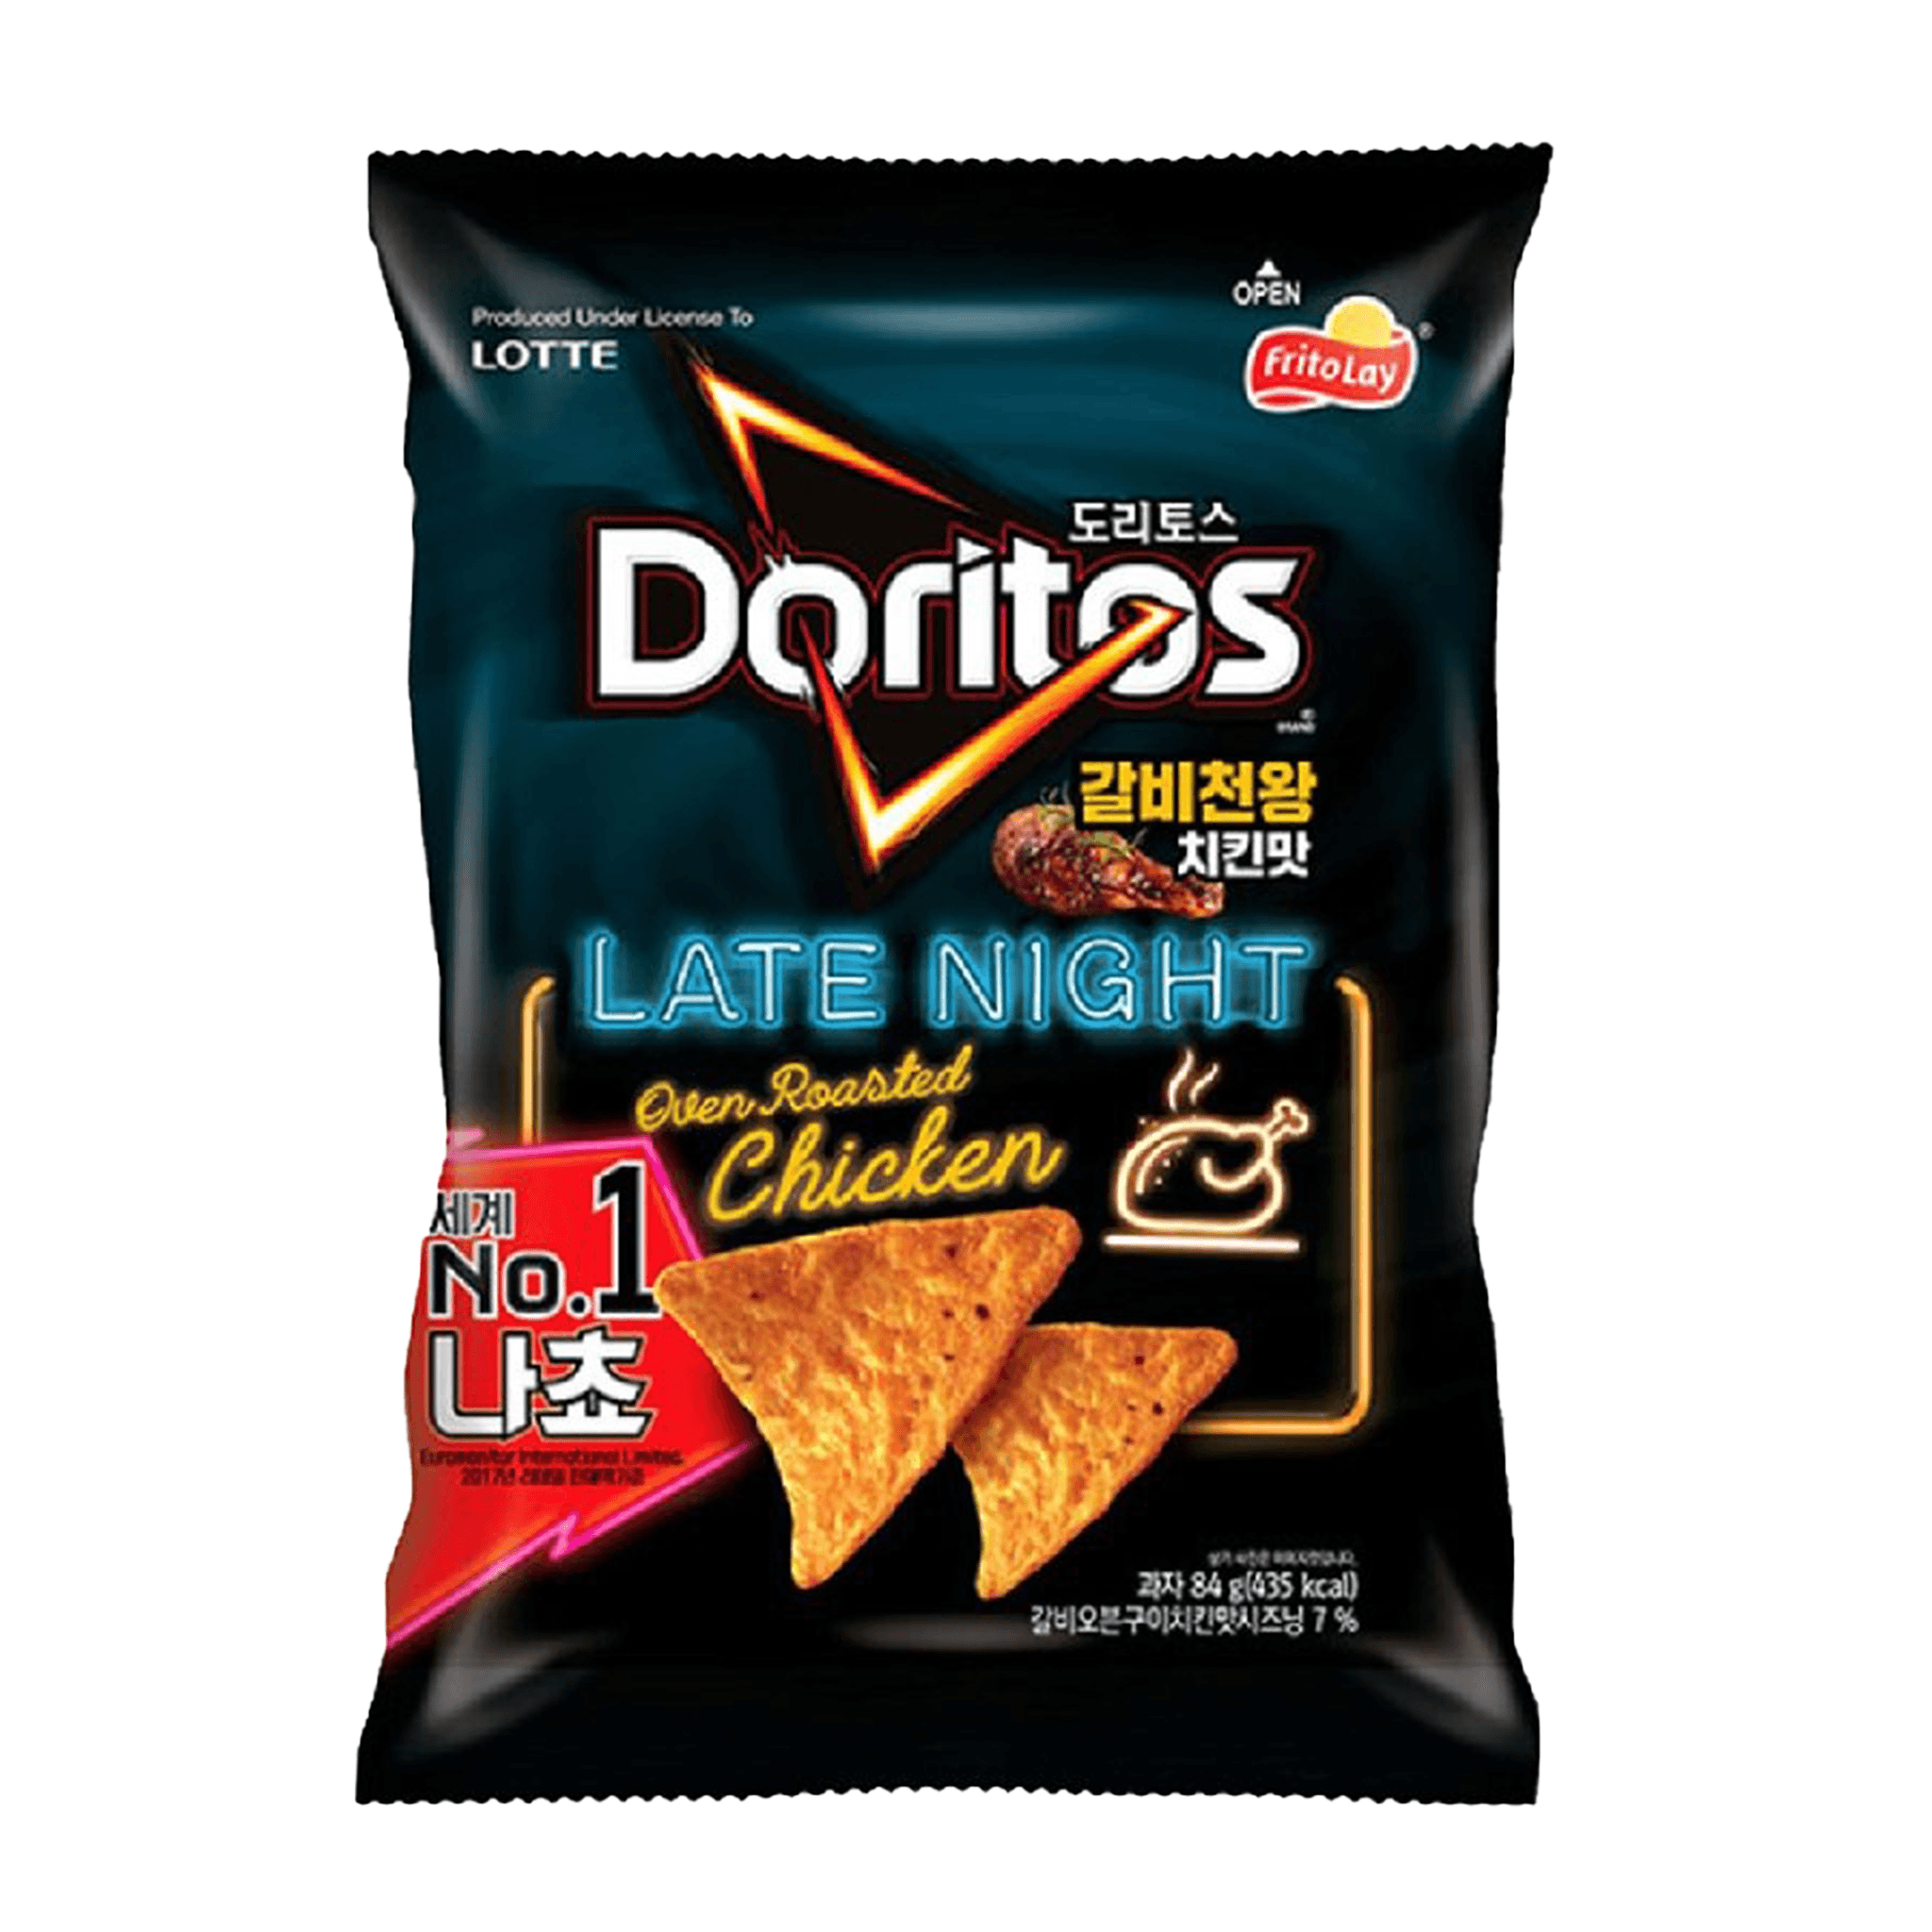 DORITOS LATE NIGHT OVEN ROASTED CHICKEN - SOUTH KOREA ( 16 Pack) W23